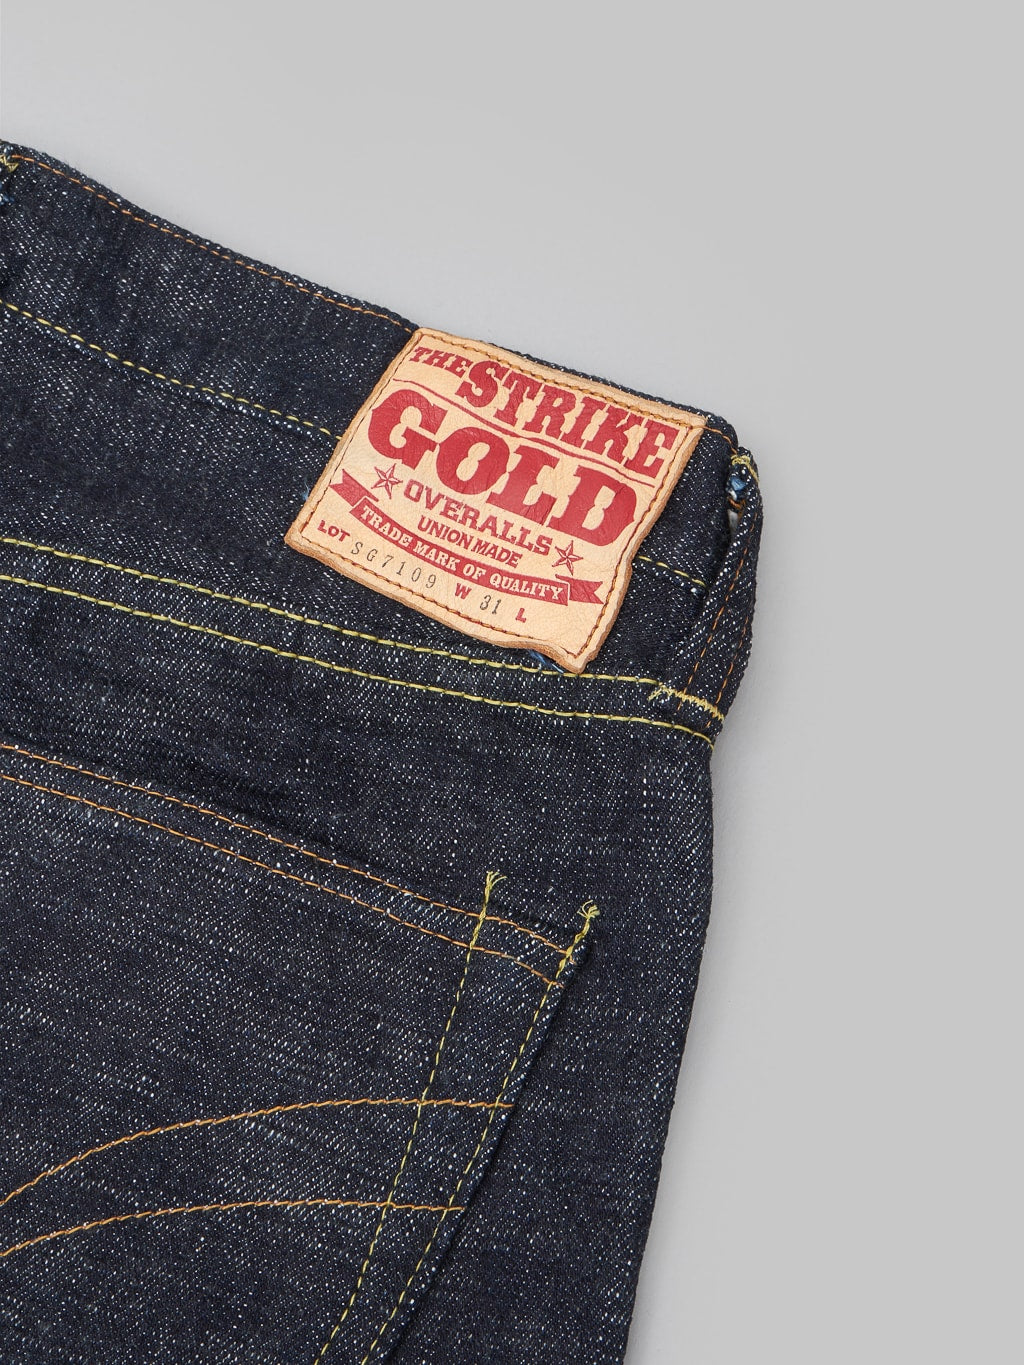 The Strike Gold 7109 Ultra Slubby Slim Tapered Jeans leather patch